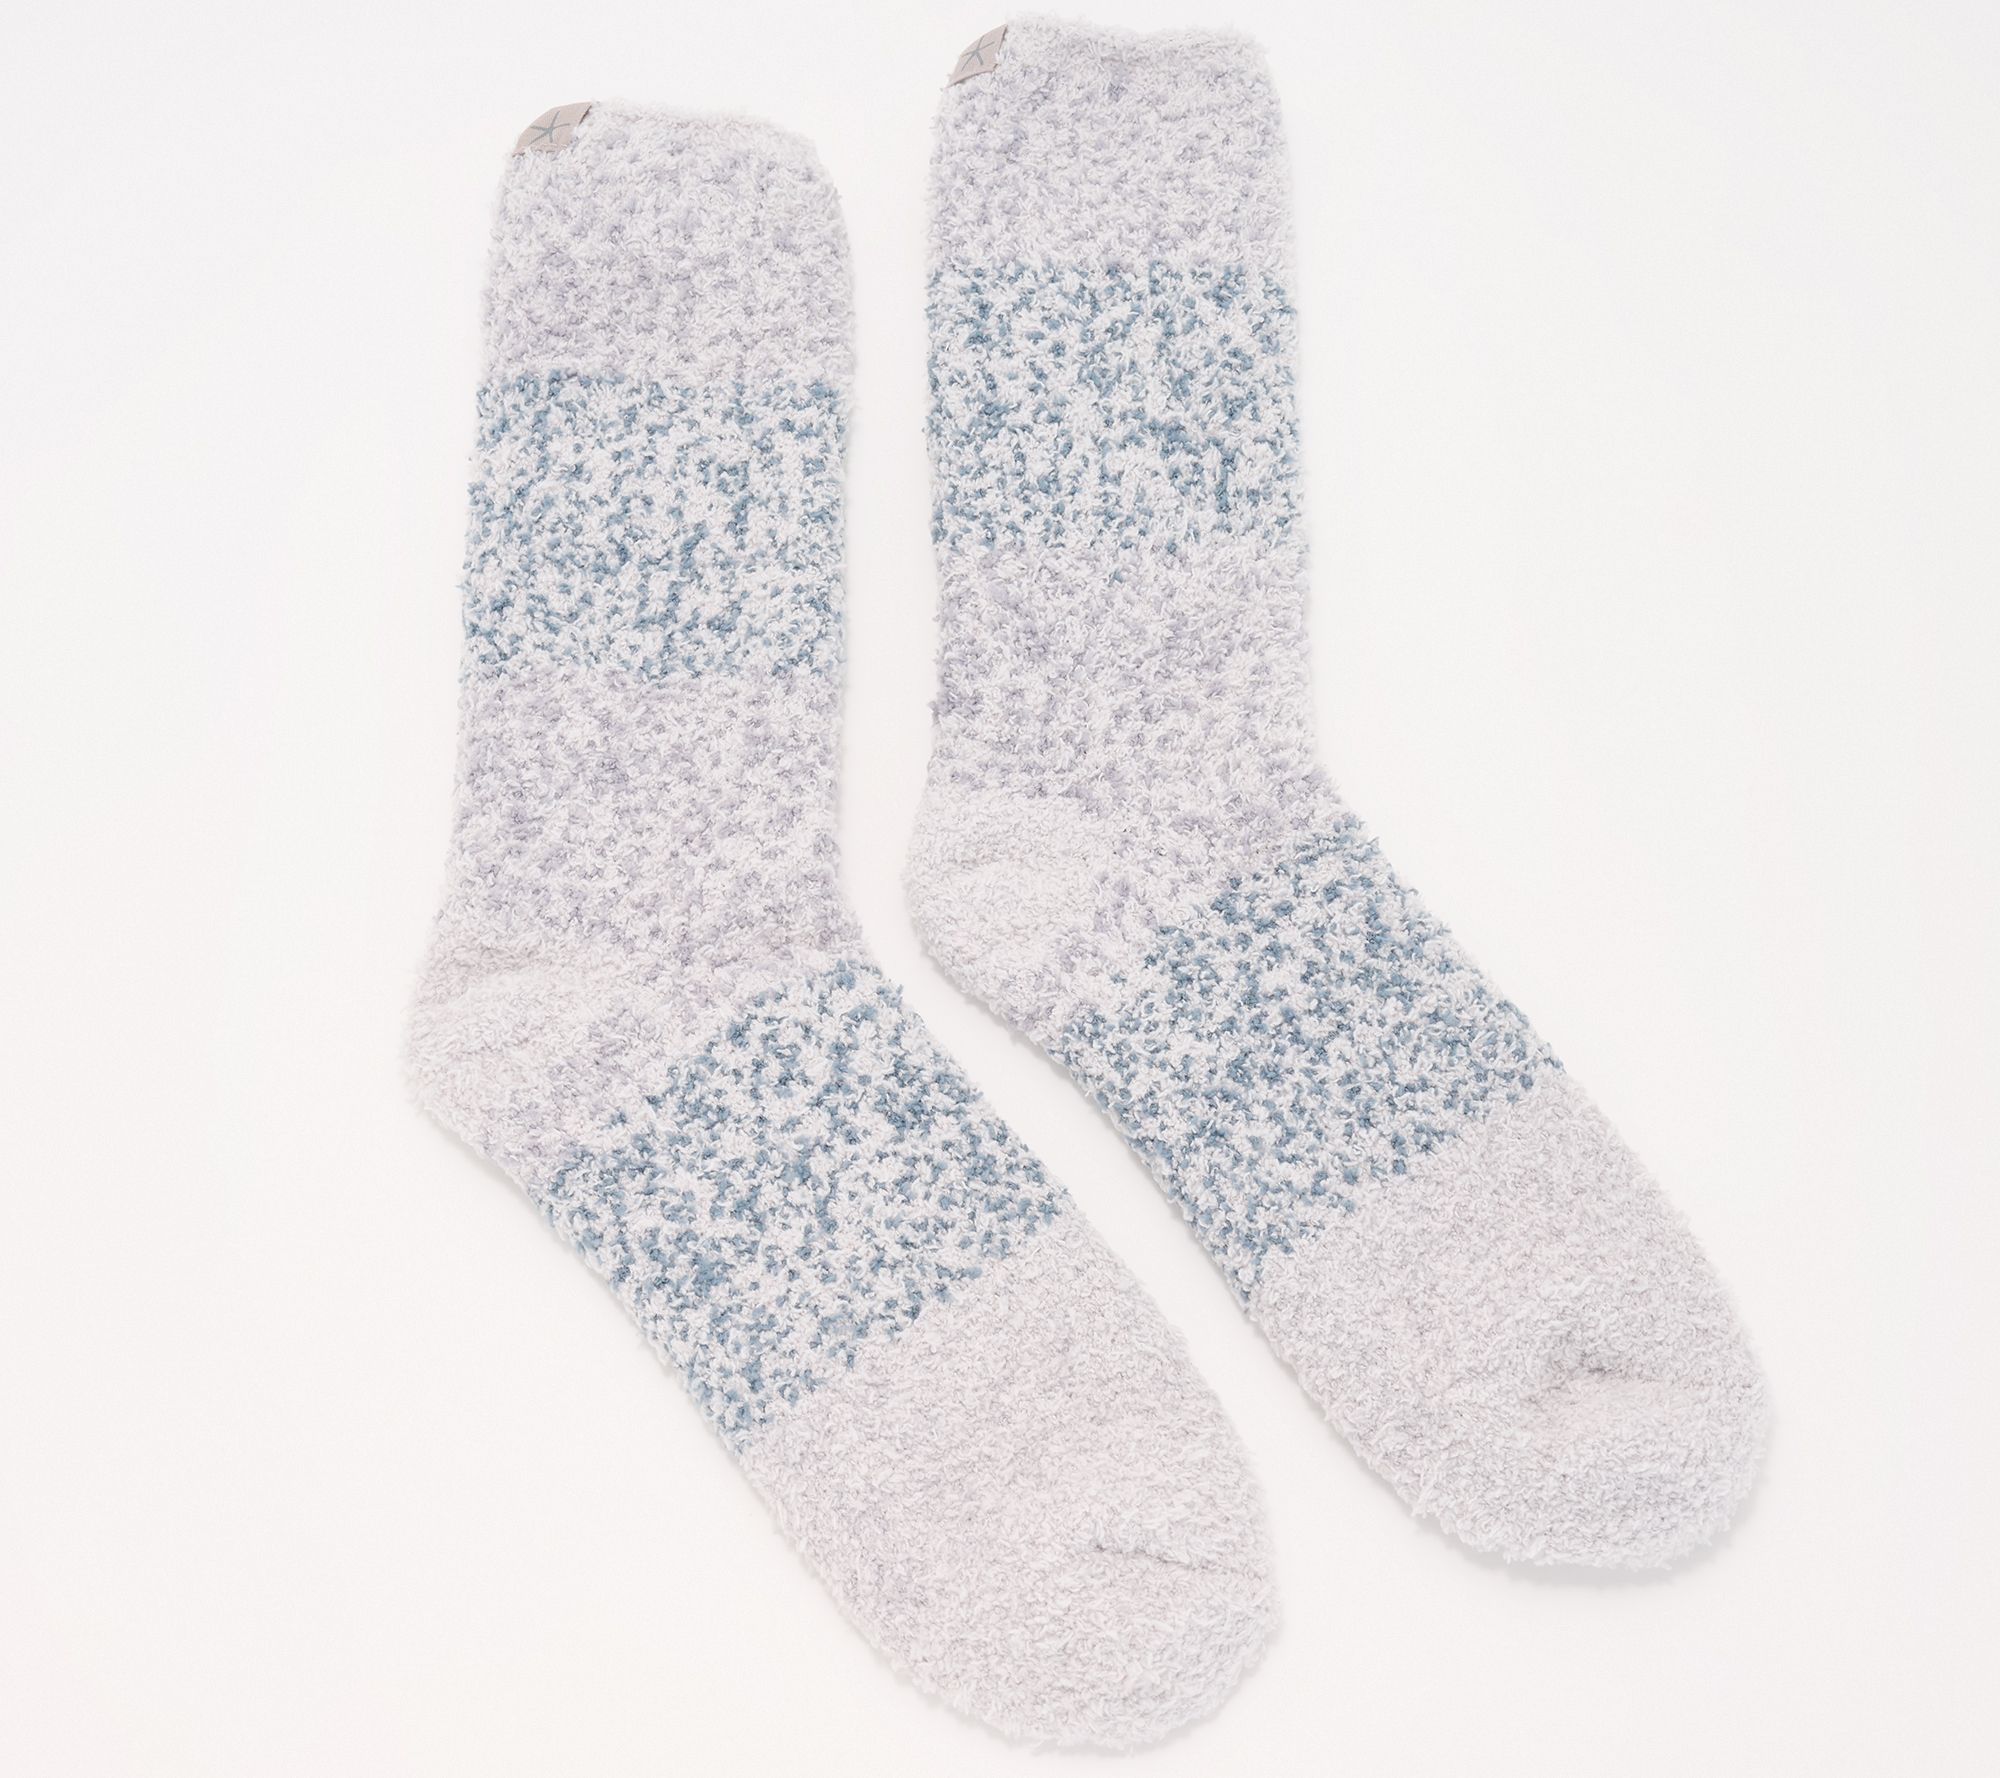  Barefoot CozyChic Ombre Socks - A619893